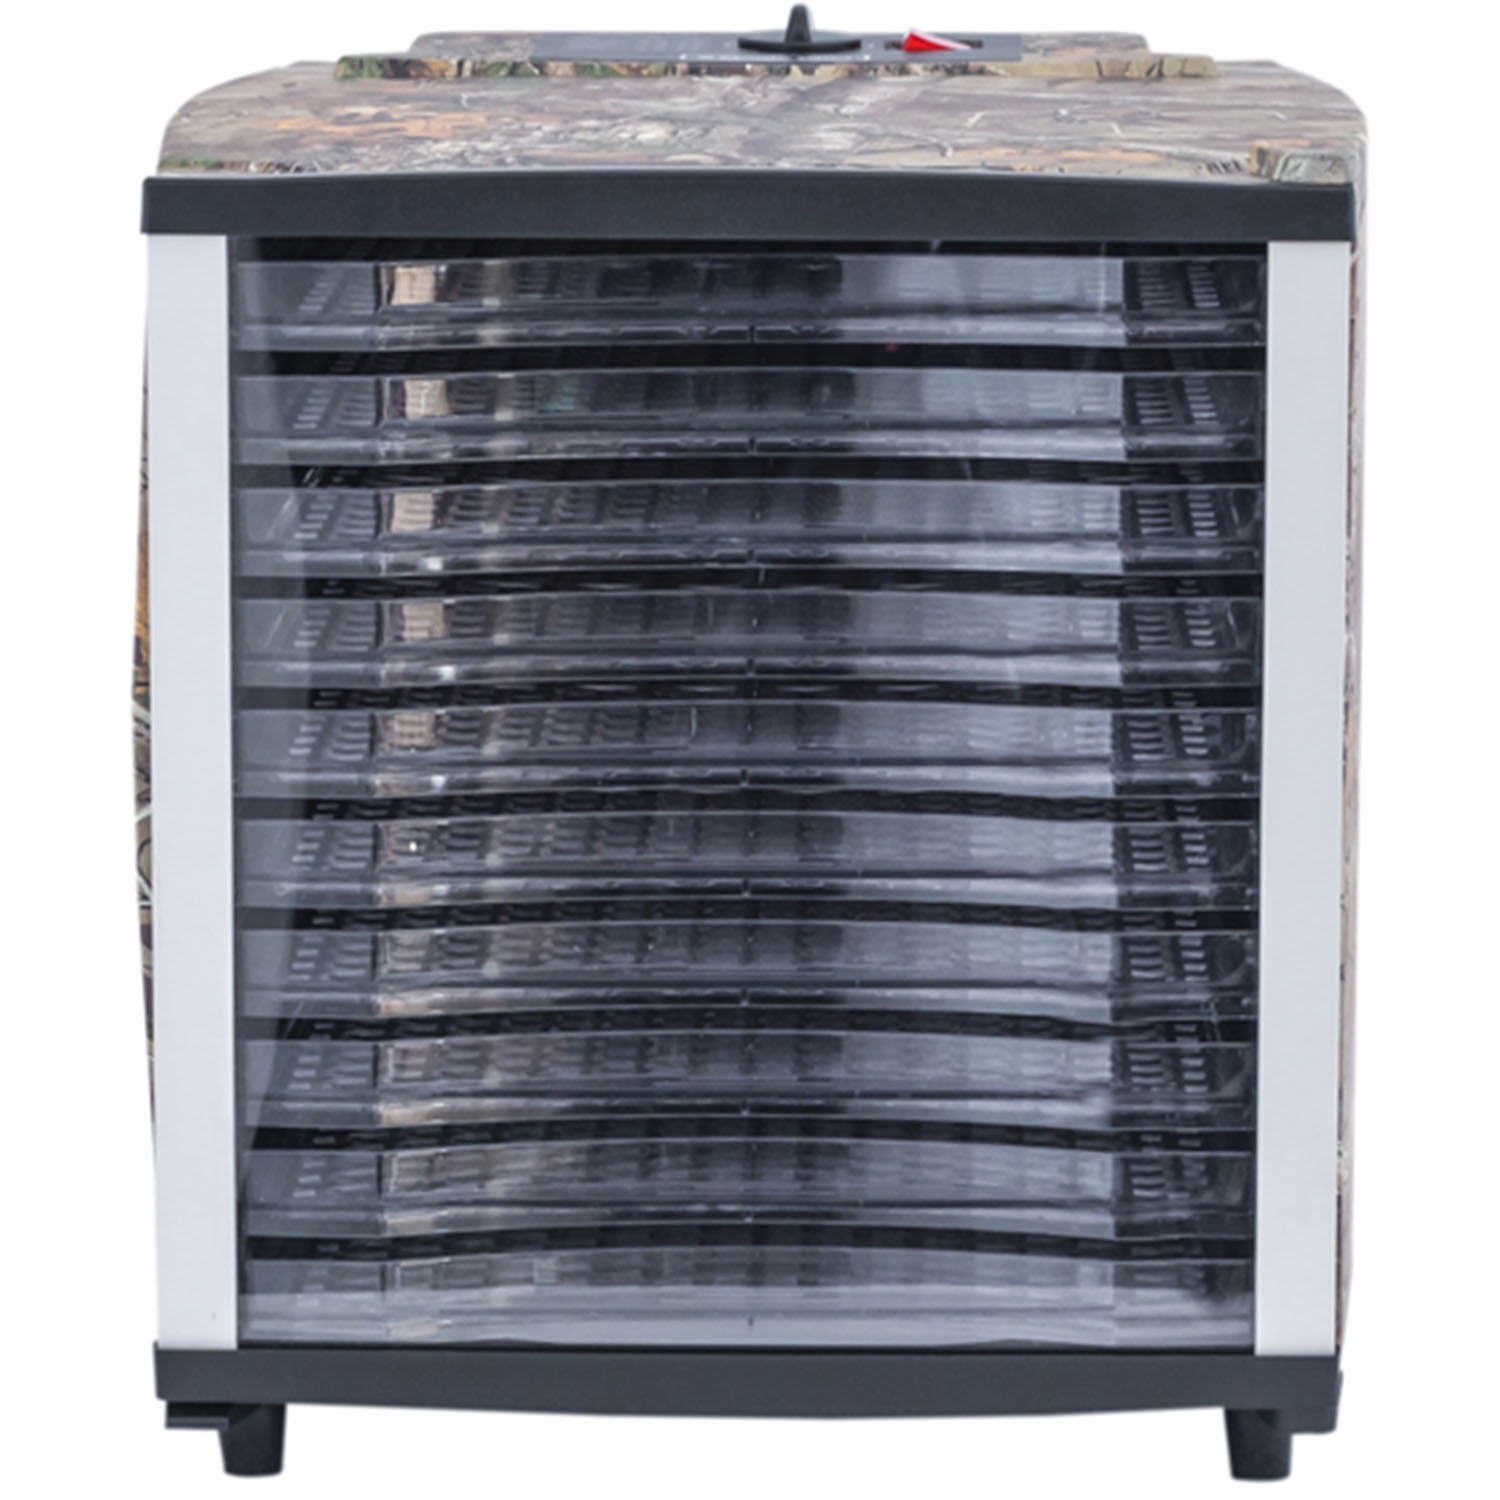 Magic Chef 10-Tray Food Dehydrator with Authentic Realtree Xtra Camouflage Pattern - image 2 of 5